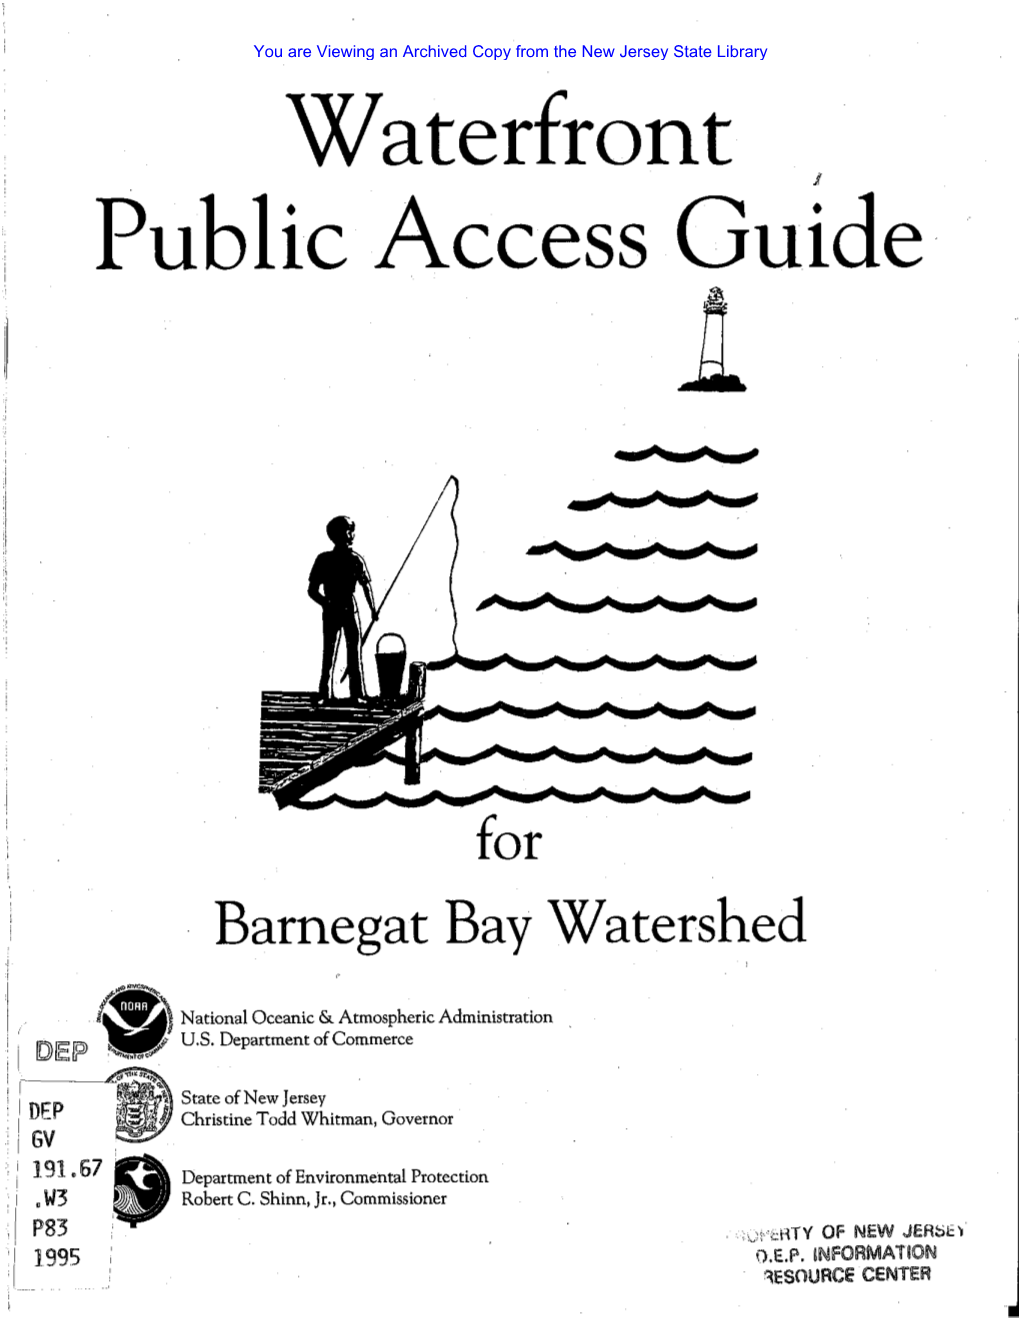 Waterfront Public Access Guide for Barnegat Bay Watershed